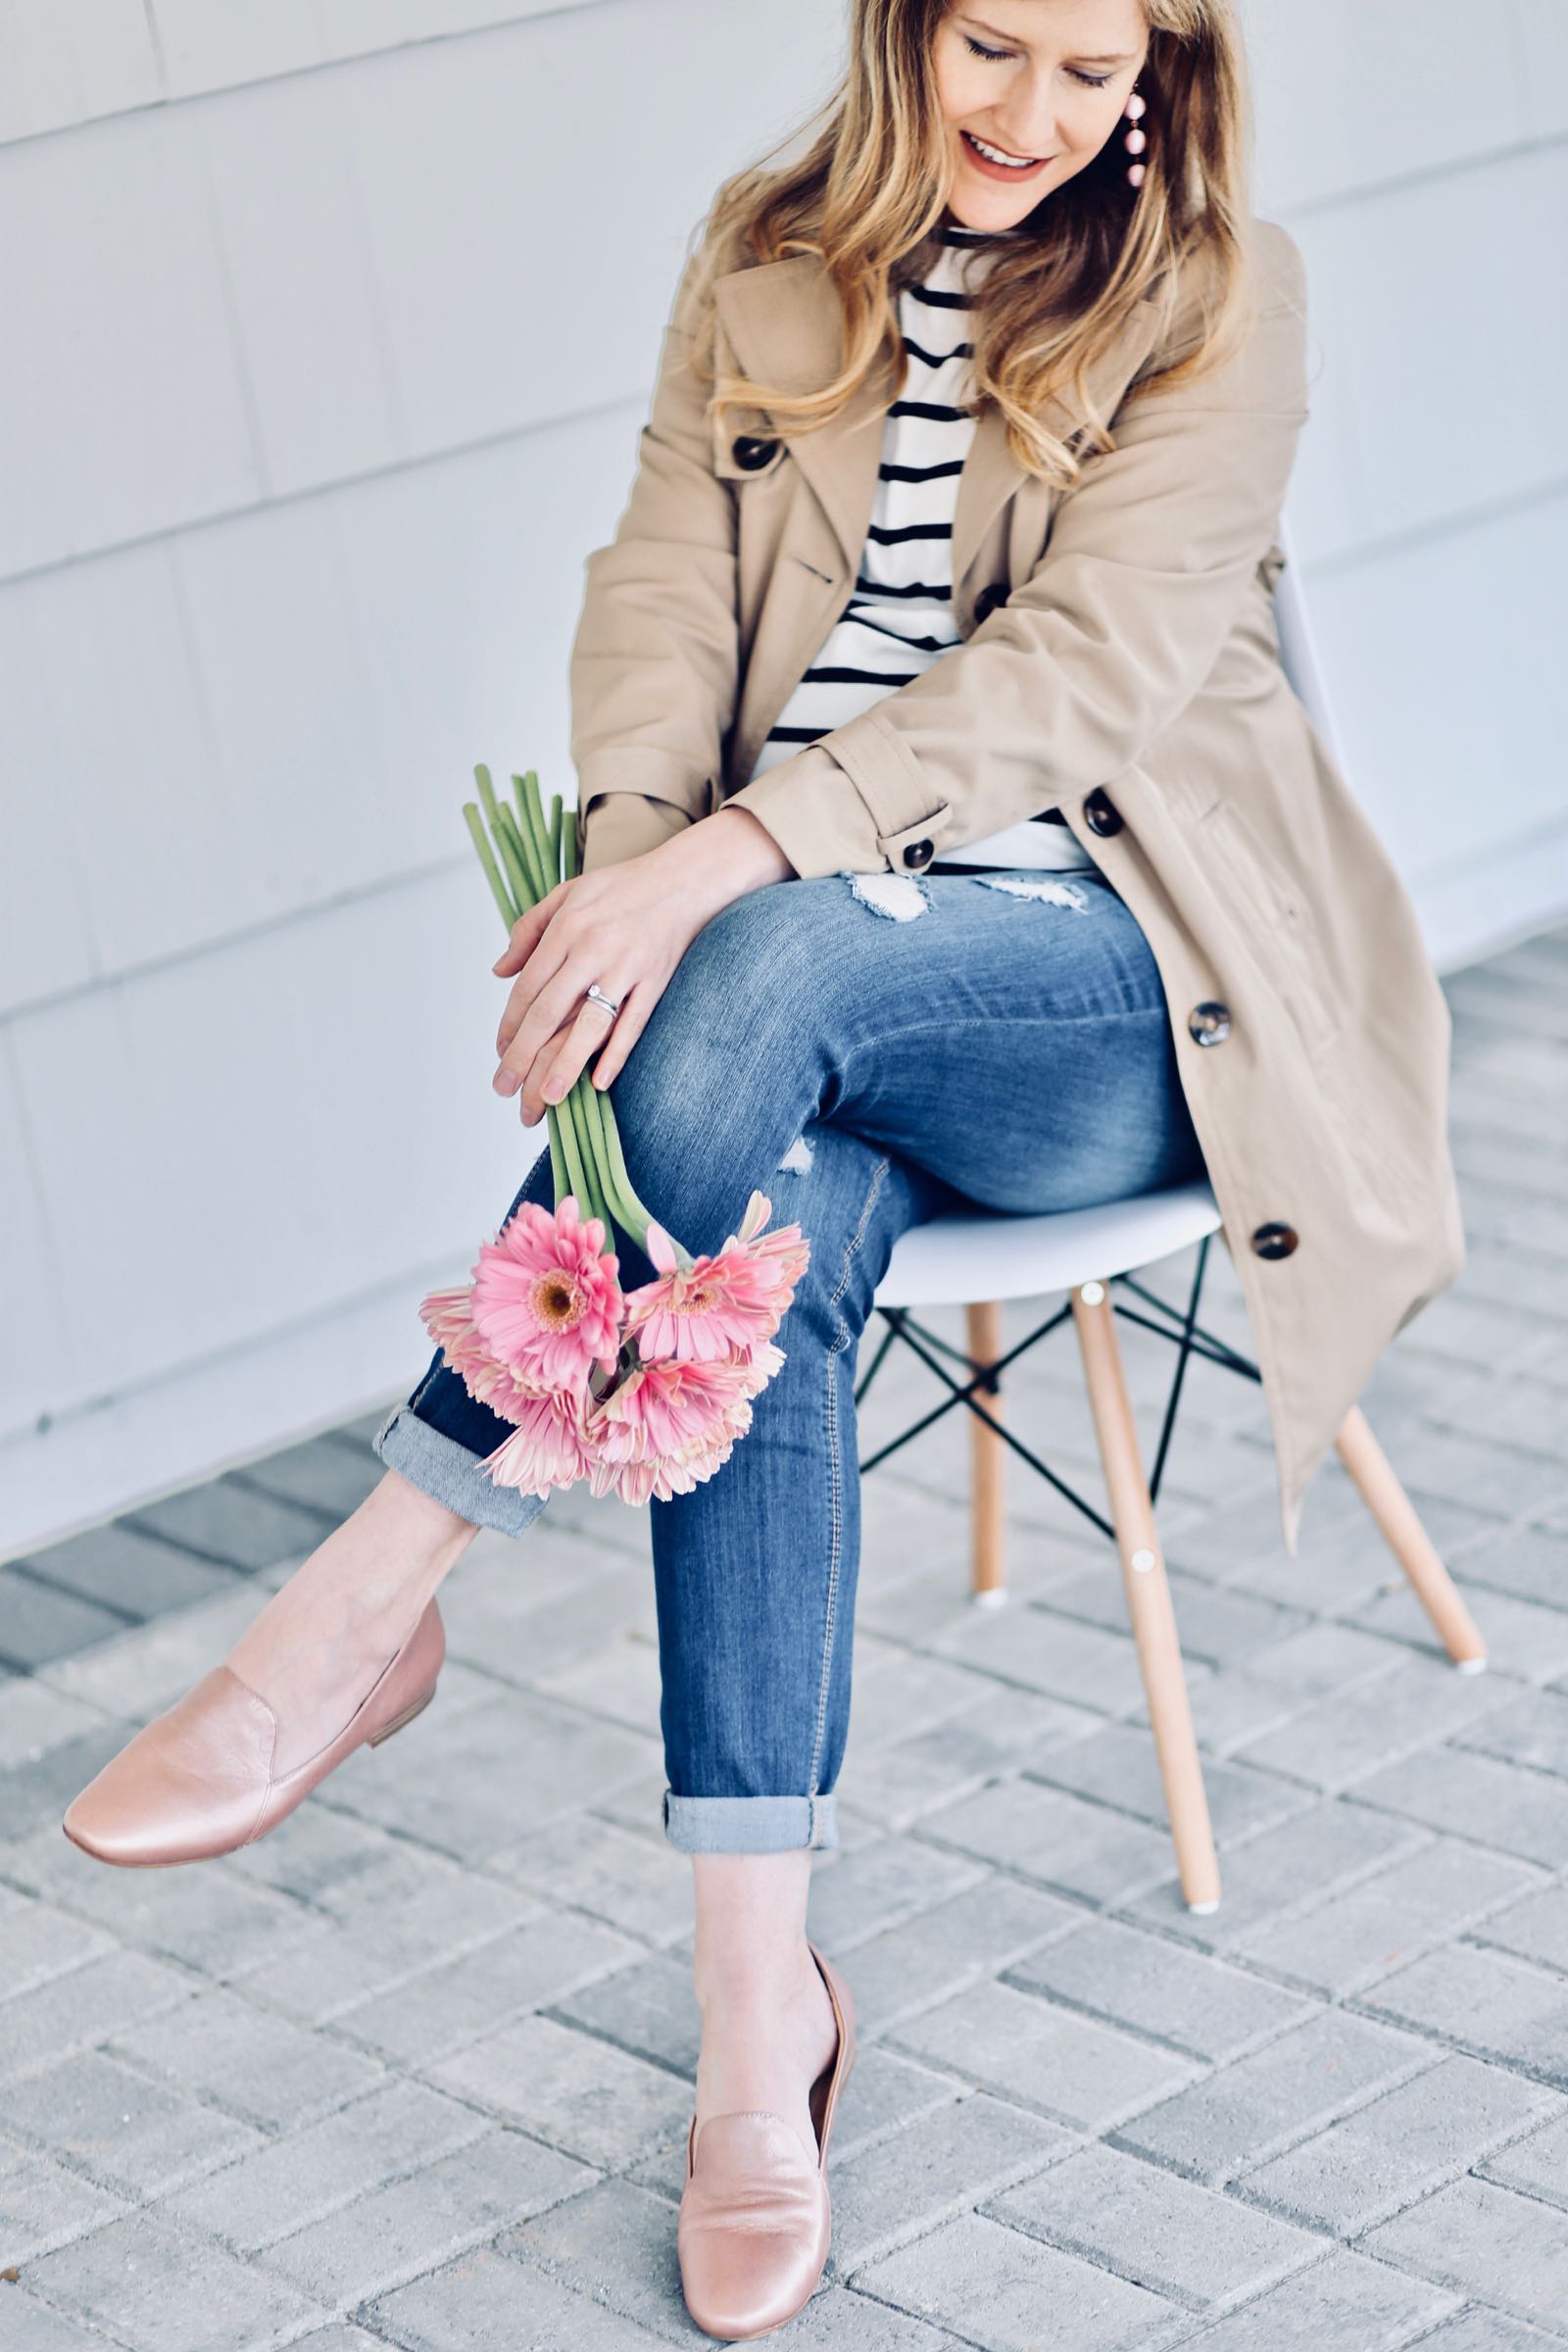 Stripe top, tan trench, blush pink loafers, distressed jeans outfit idea #momstyle #maternitystyle #ad